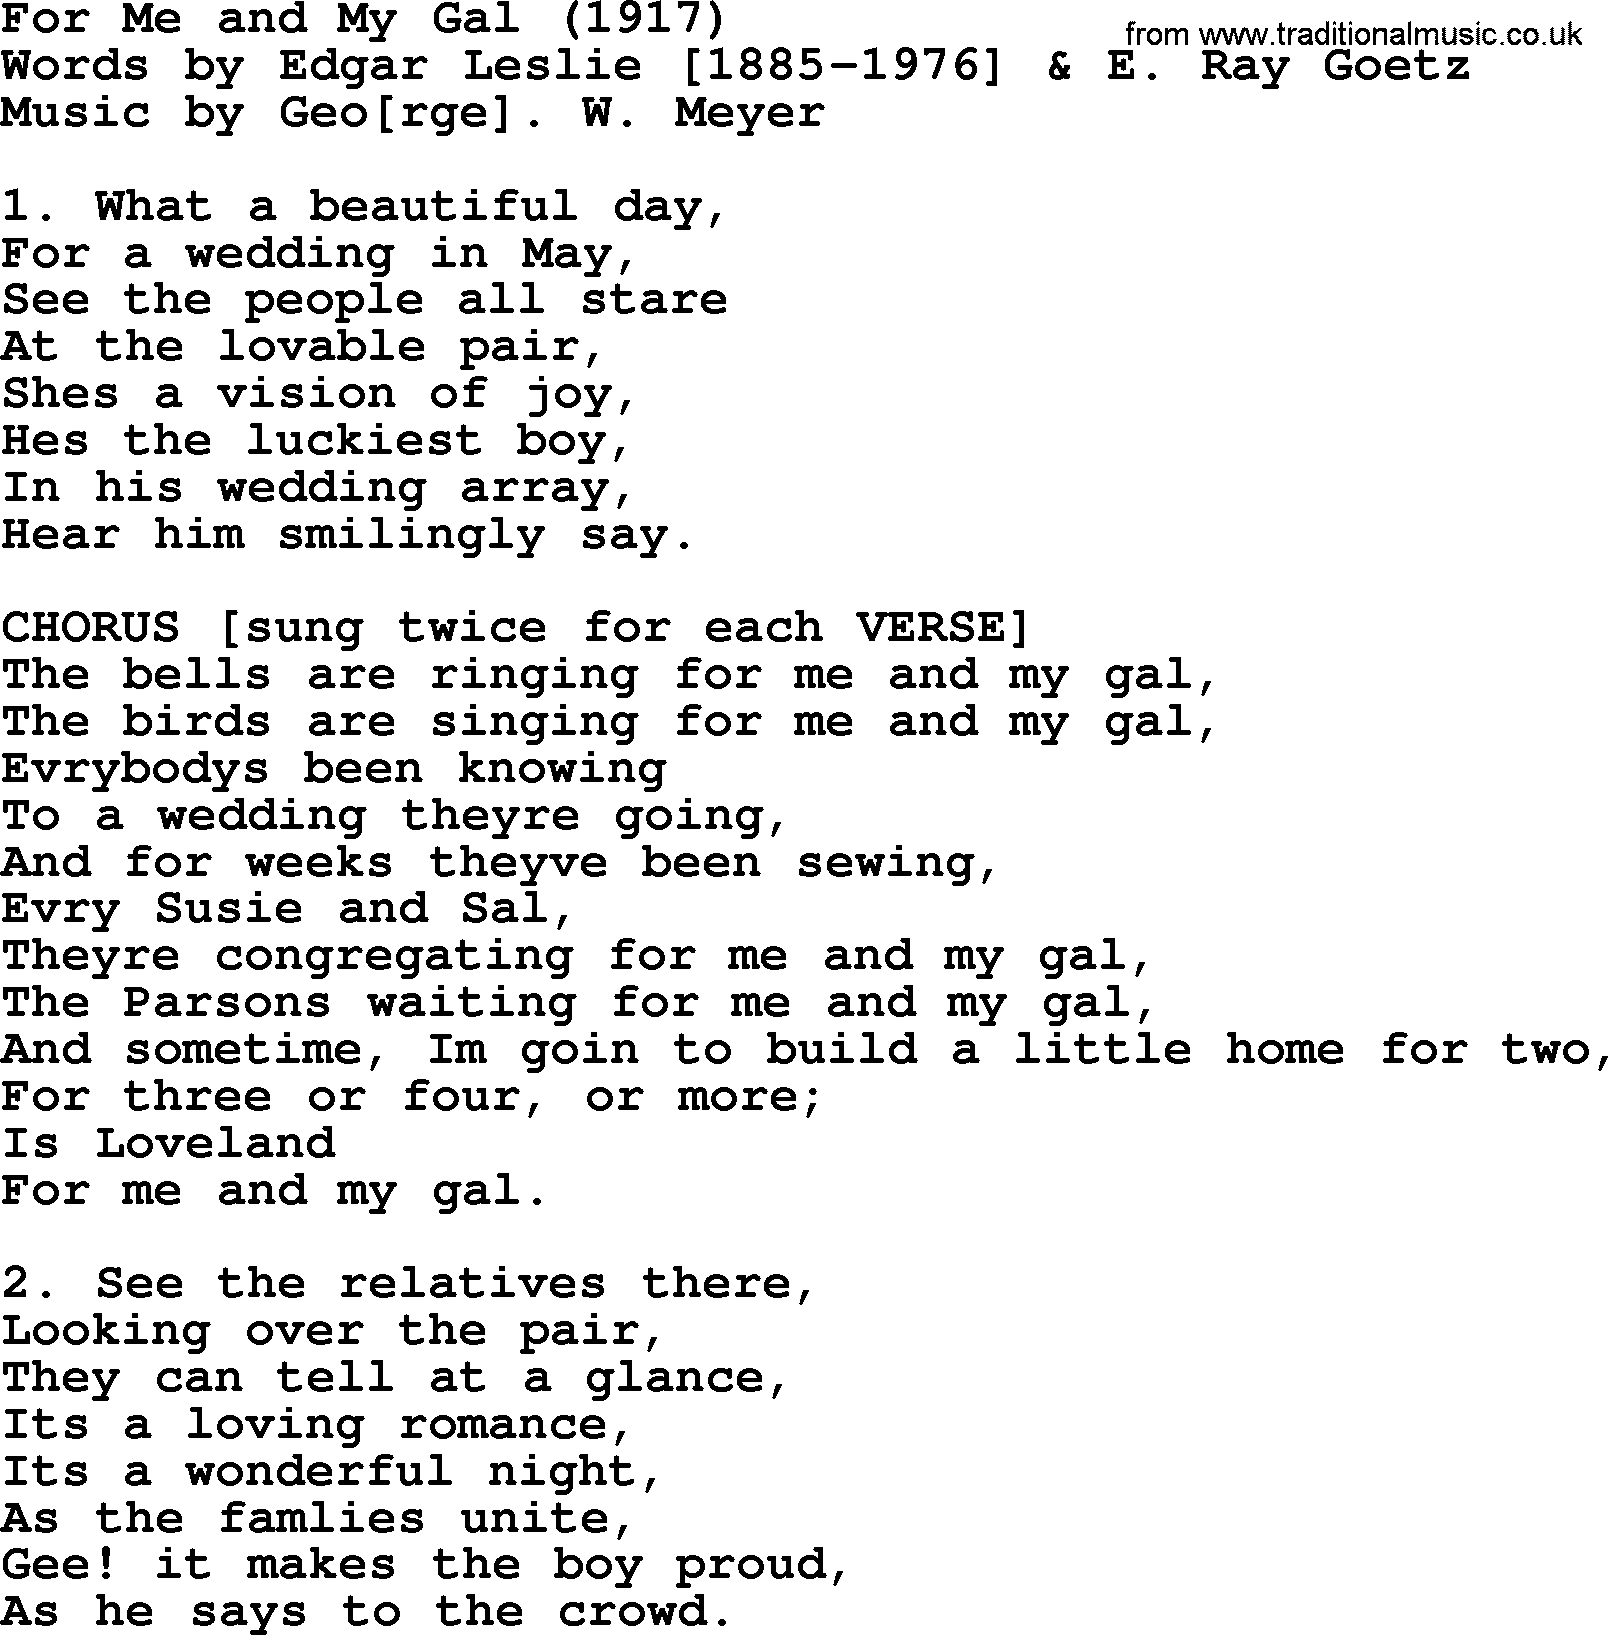 World War(WW1) One Song: For Me And My Gal 1917, lyrics and PDF